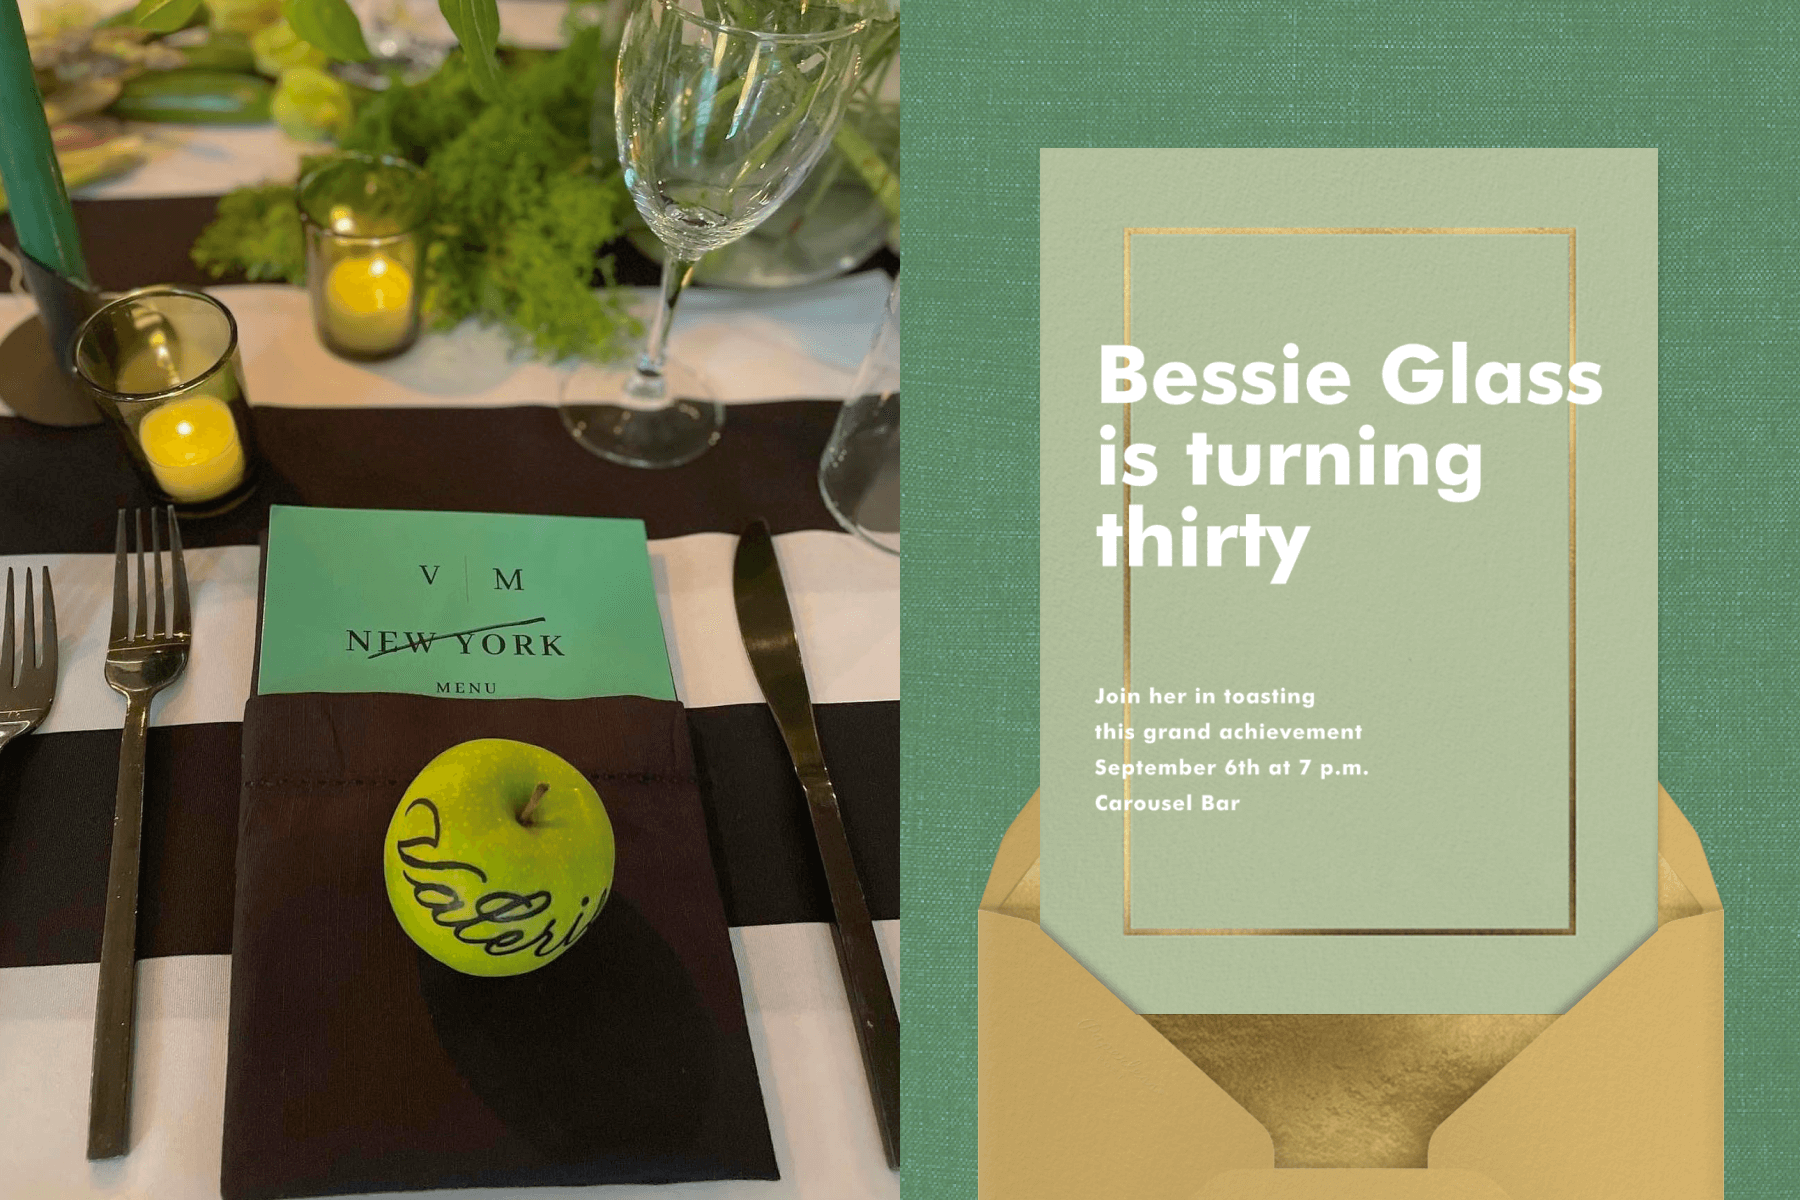 Left: On a black and white striped tablecloth, a green menu is wrapped in a black cloth napkin with a green apple burnished with the name “Valerie.” Right: A mossy green birthday invitation has a thin gold border floating away from the edges of the card, above a gold envelope.